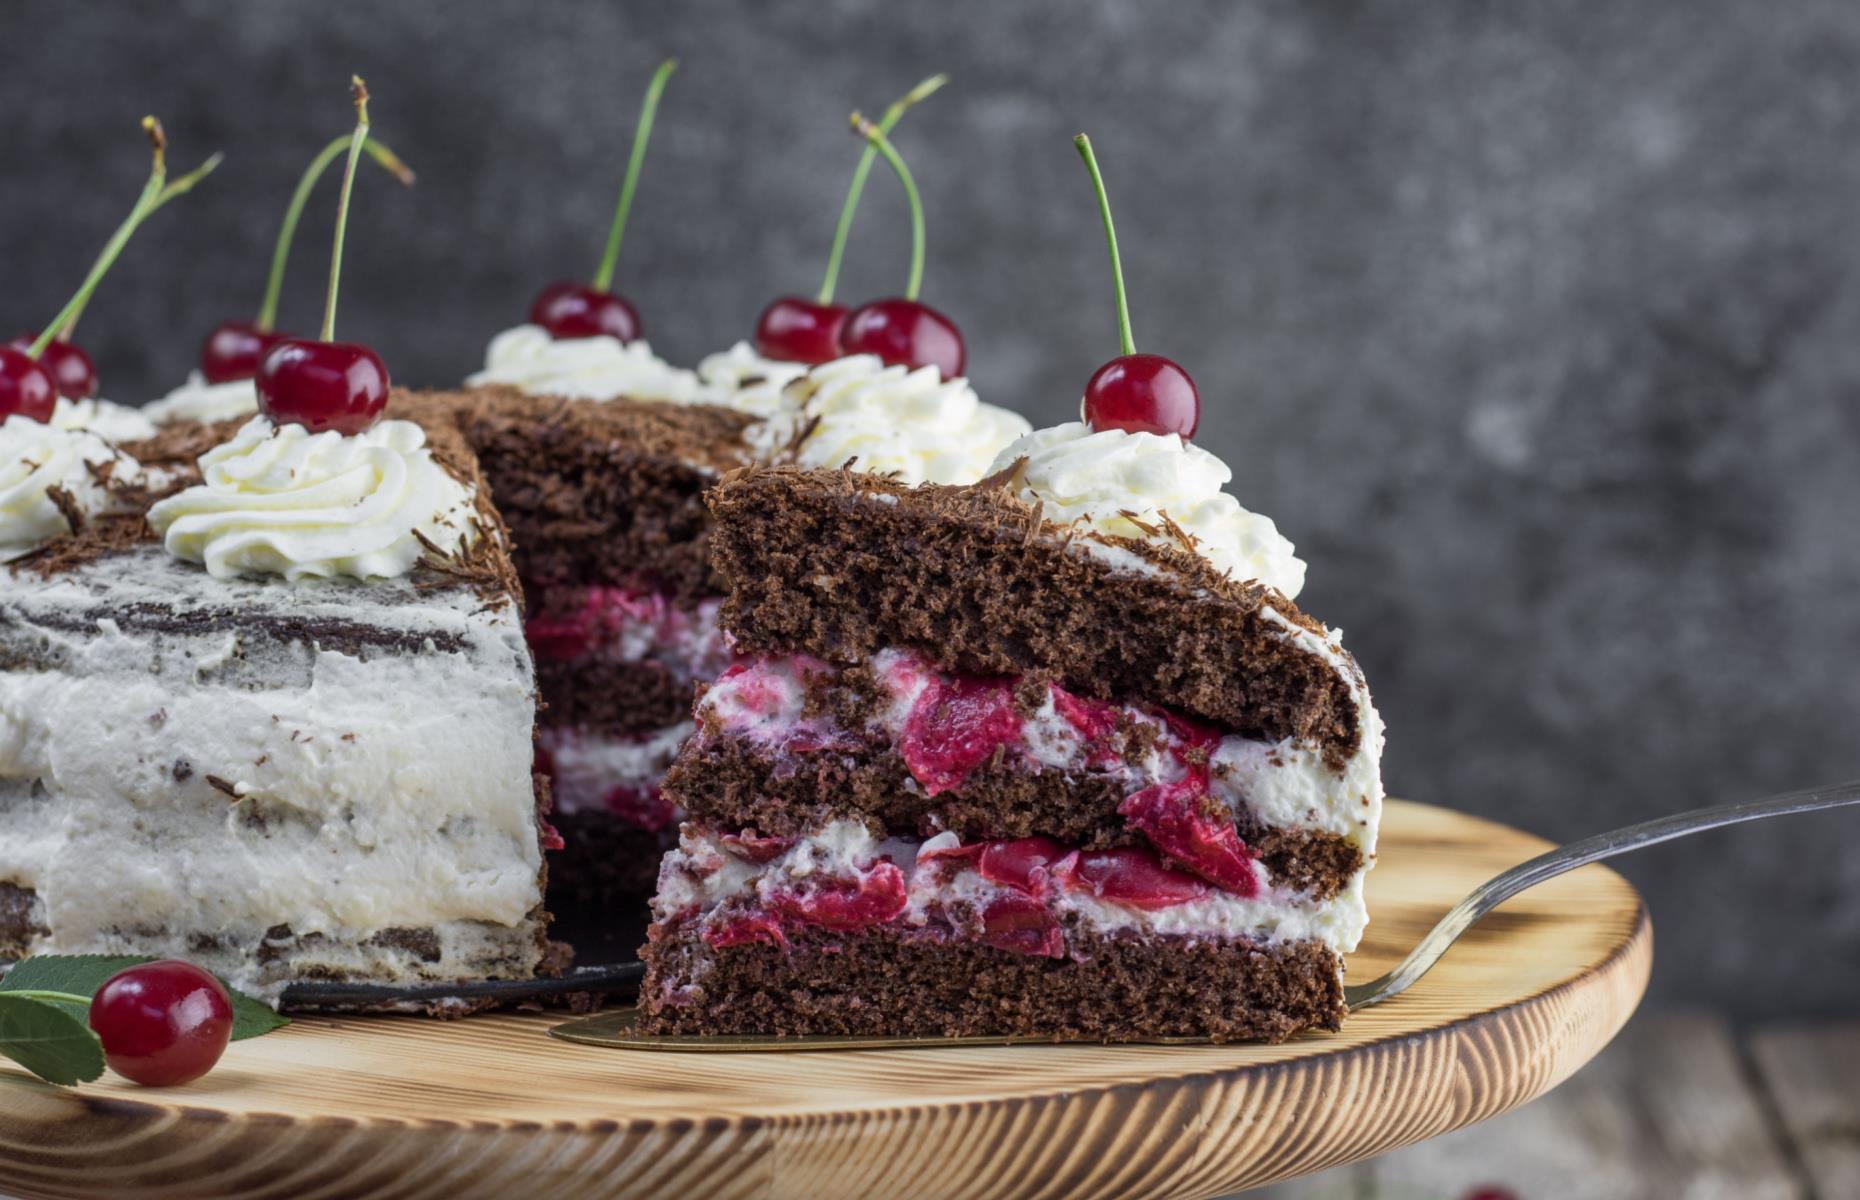 Ranked: the world's most delicious cakes